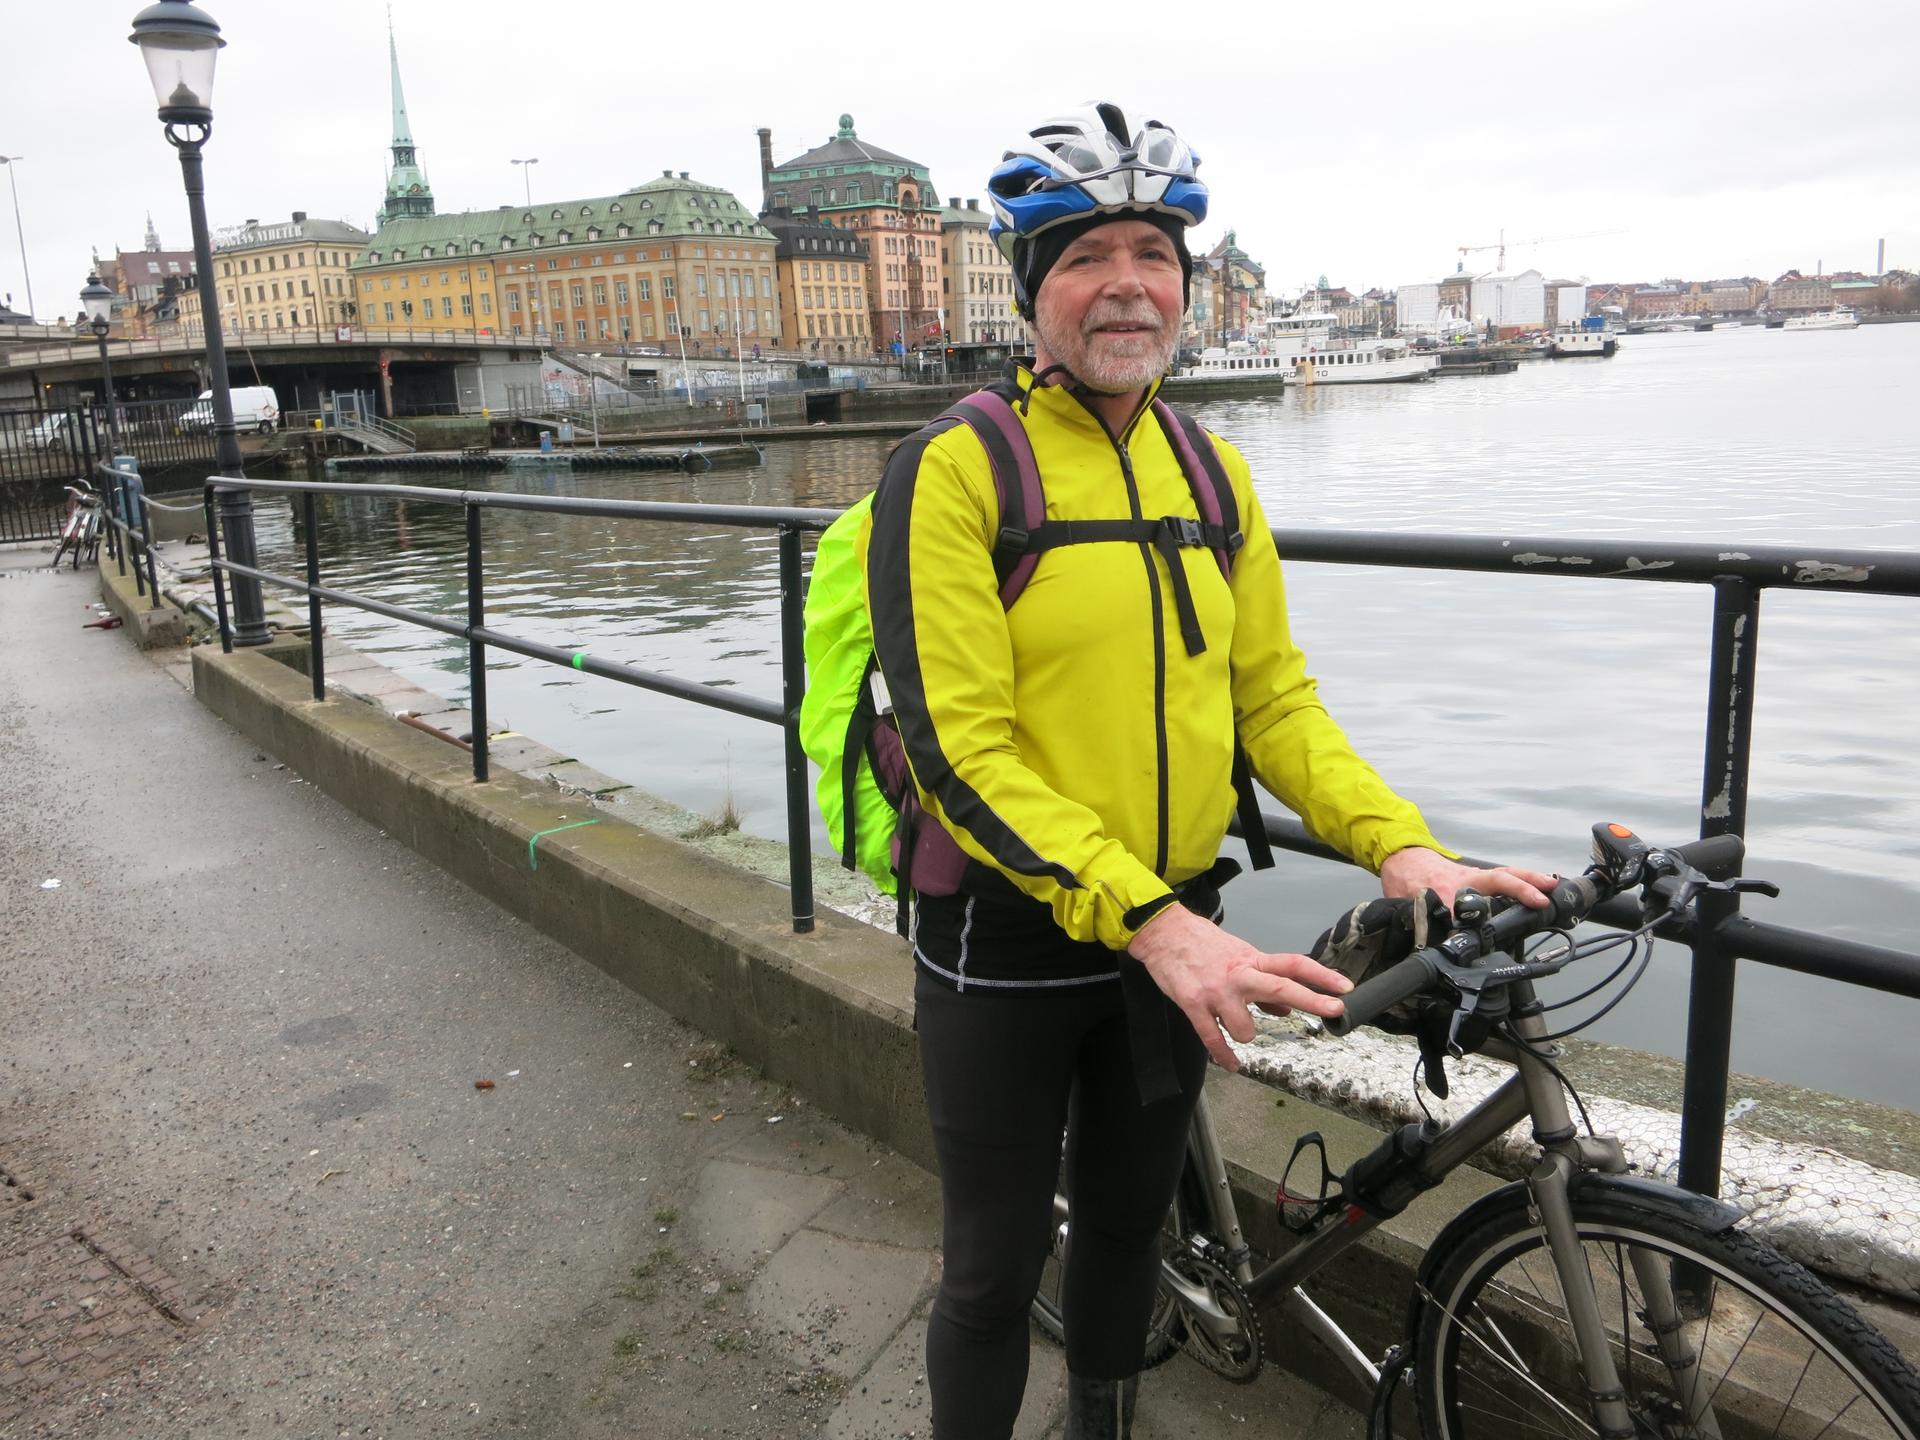 Riggert Anderson cycles year round in Sweden in rain, sleet, or snow.